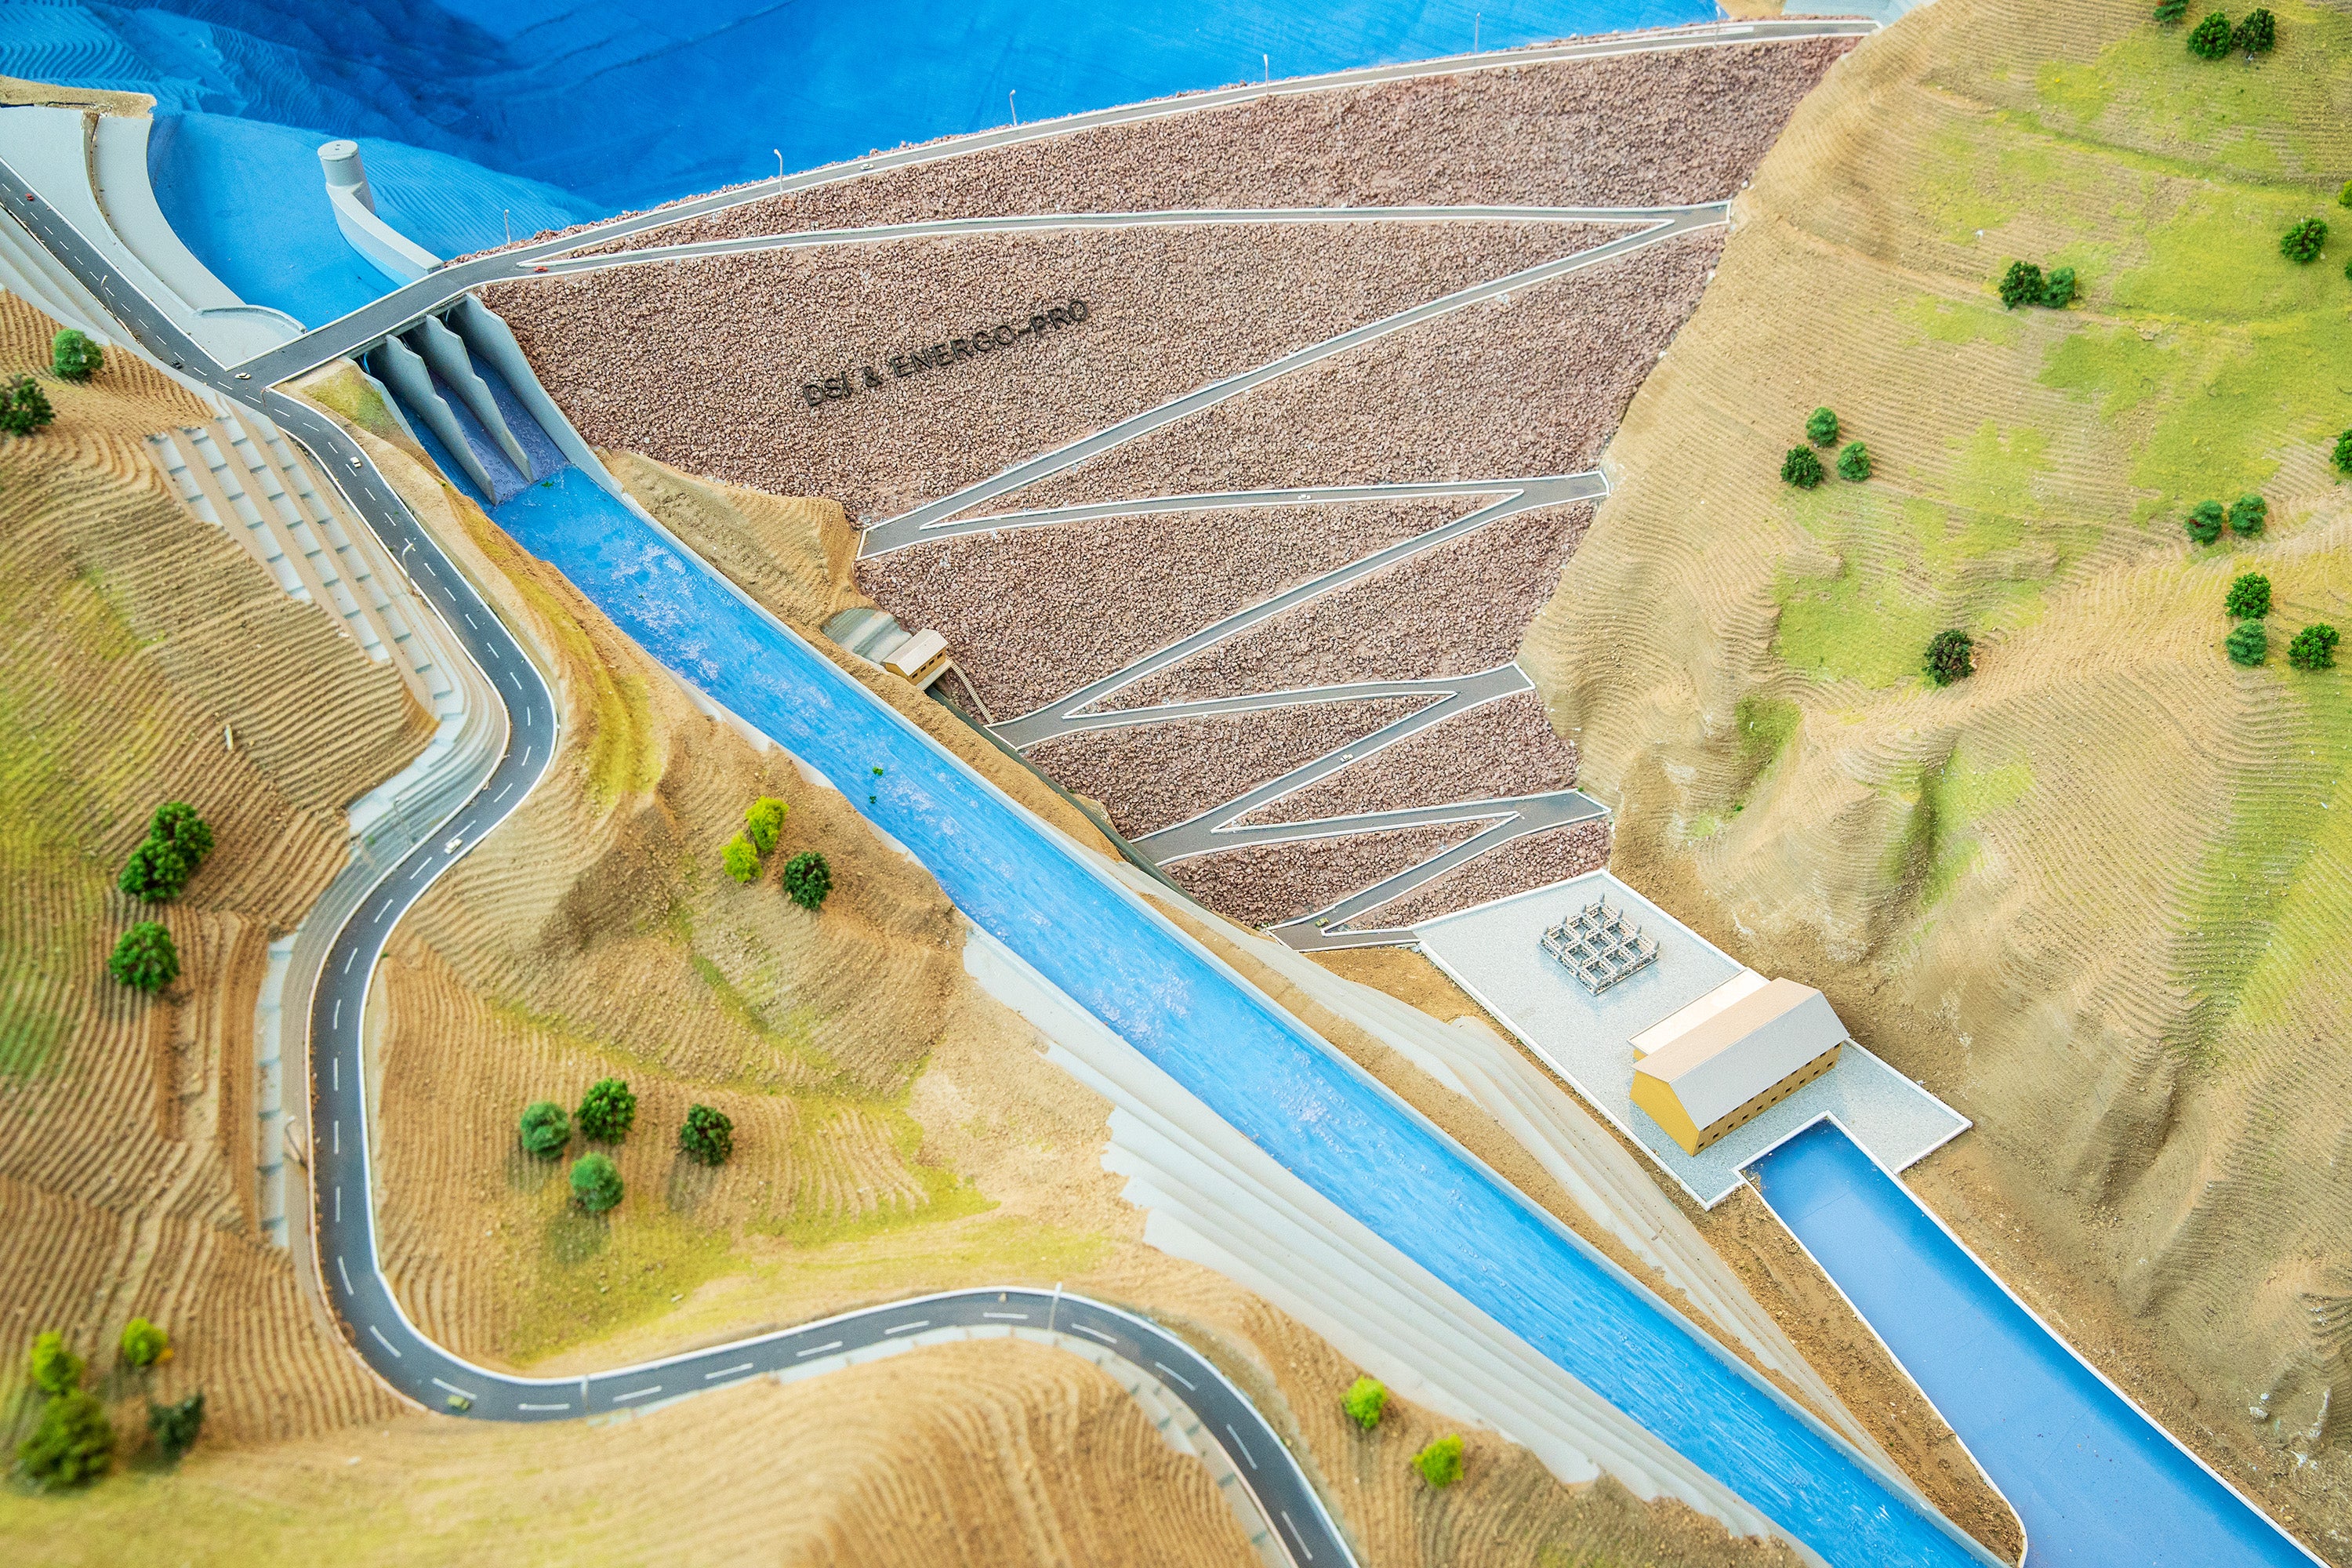 Czechs are building two large dams with hydro power plants in Turkey 